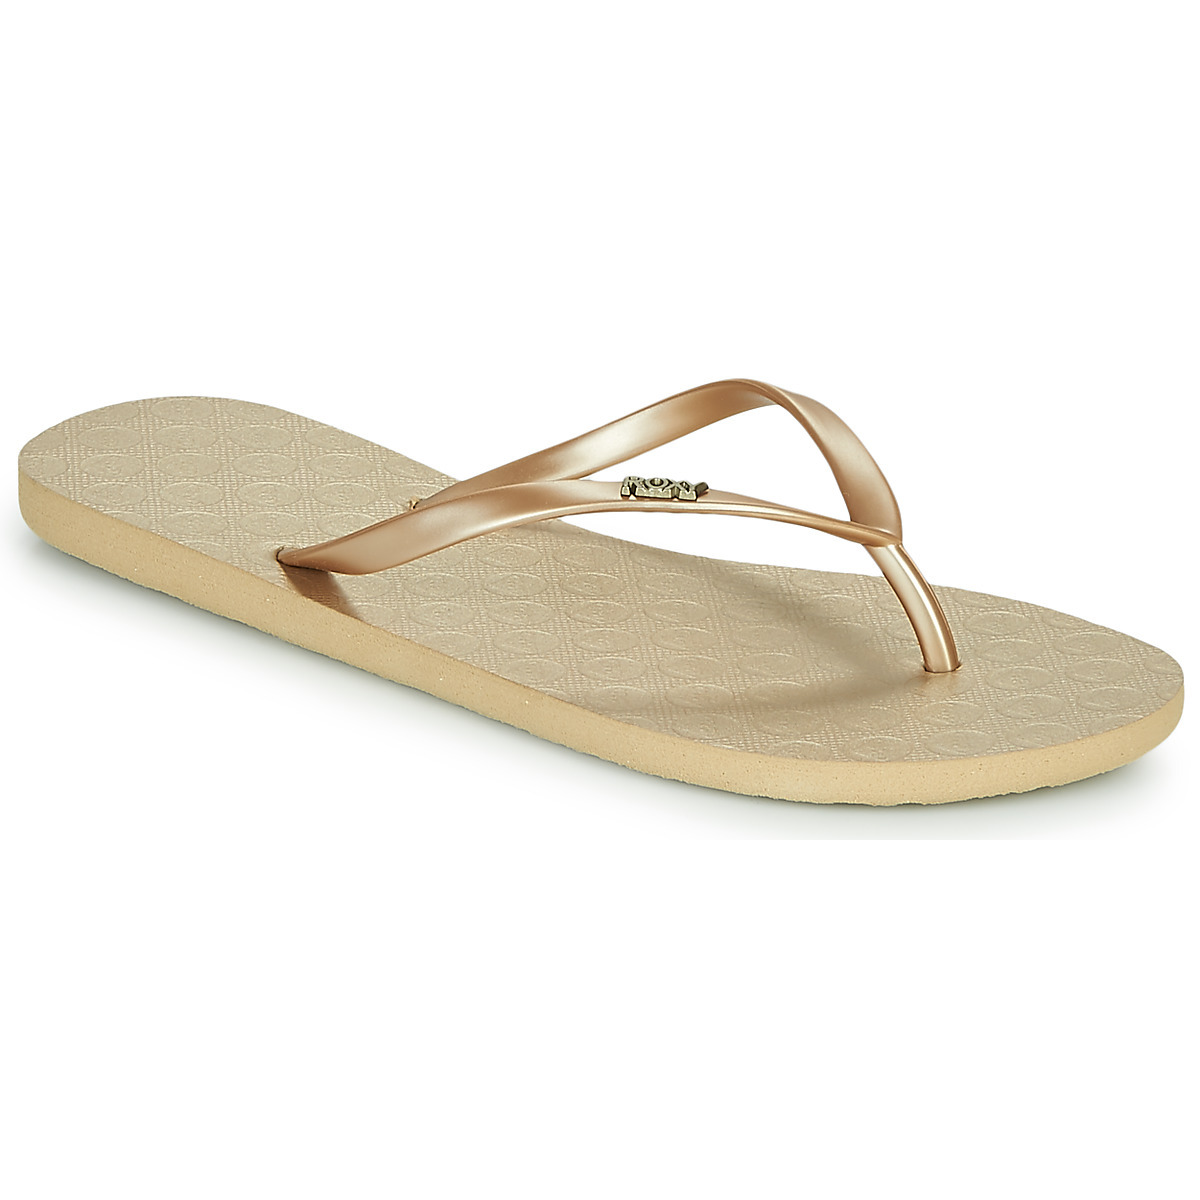 Roxy - Gold Flip Flops for Woman at Spartoo GOOFASH